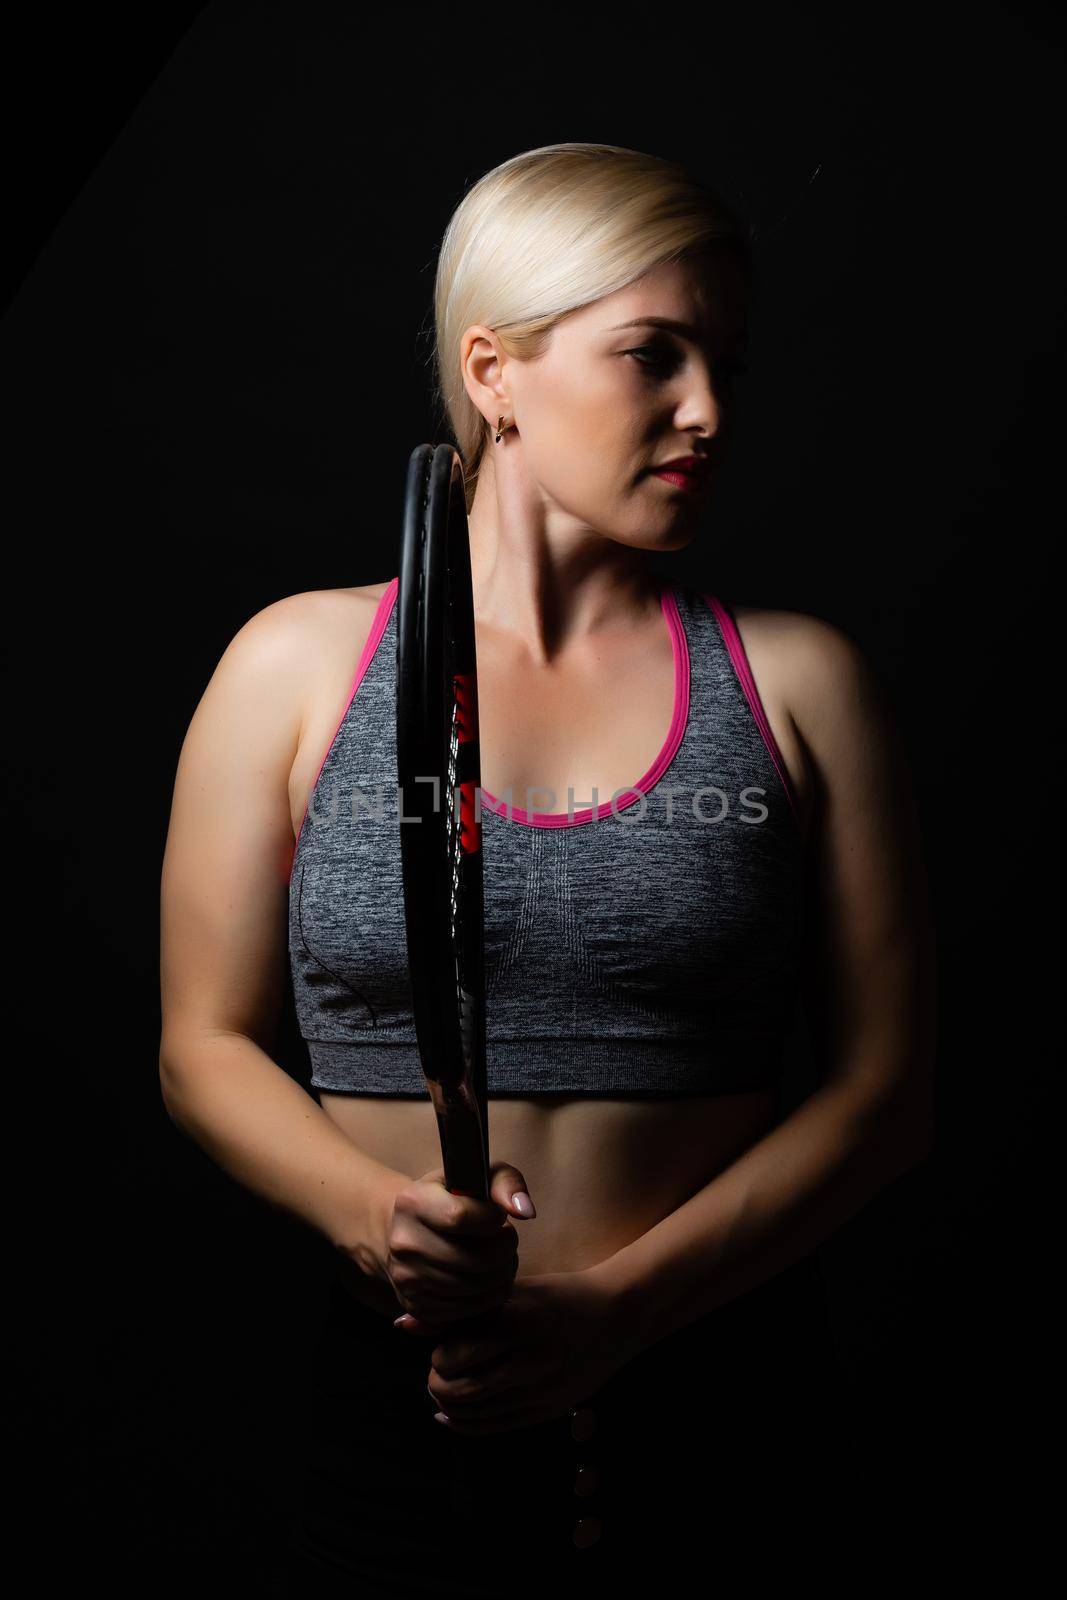 Female tennis player with racket and ball on black background by Andelov13